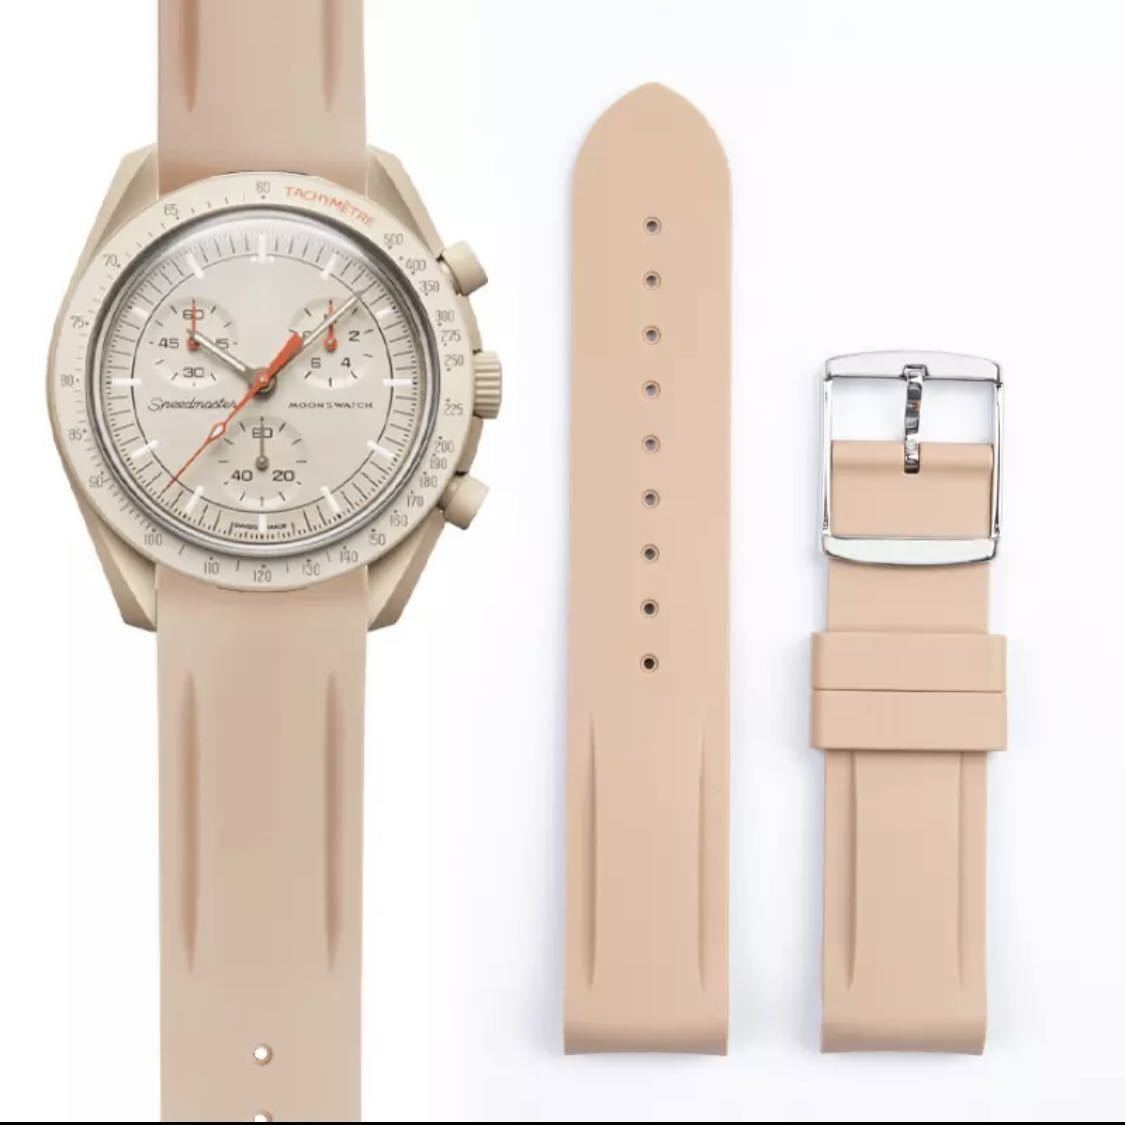 SWATCH×OMEGA MISSION TO JUPITER MOON SWATCH COLLECTION｜PayPayフリマ